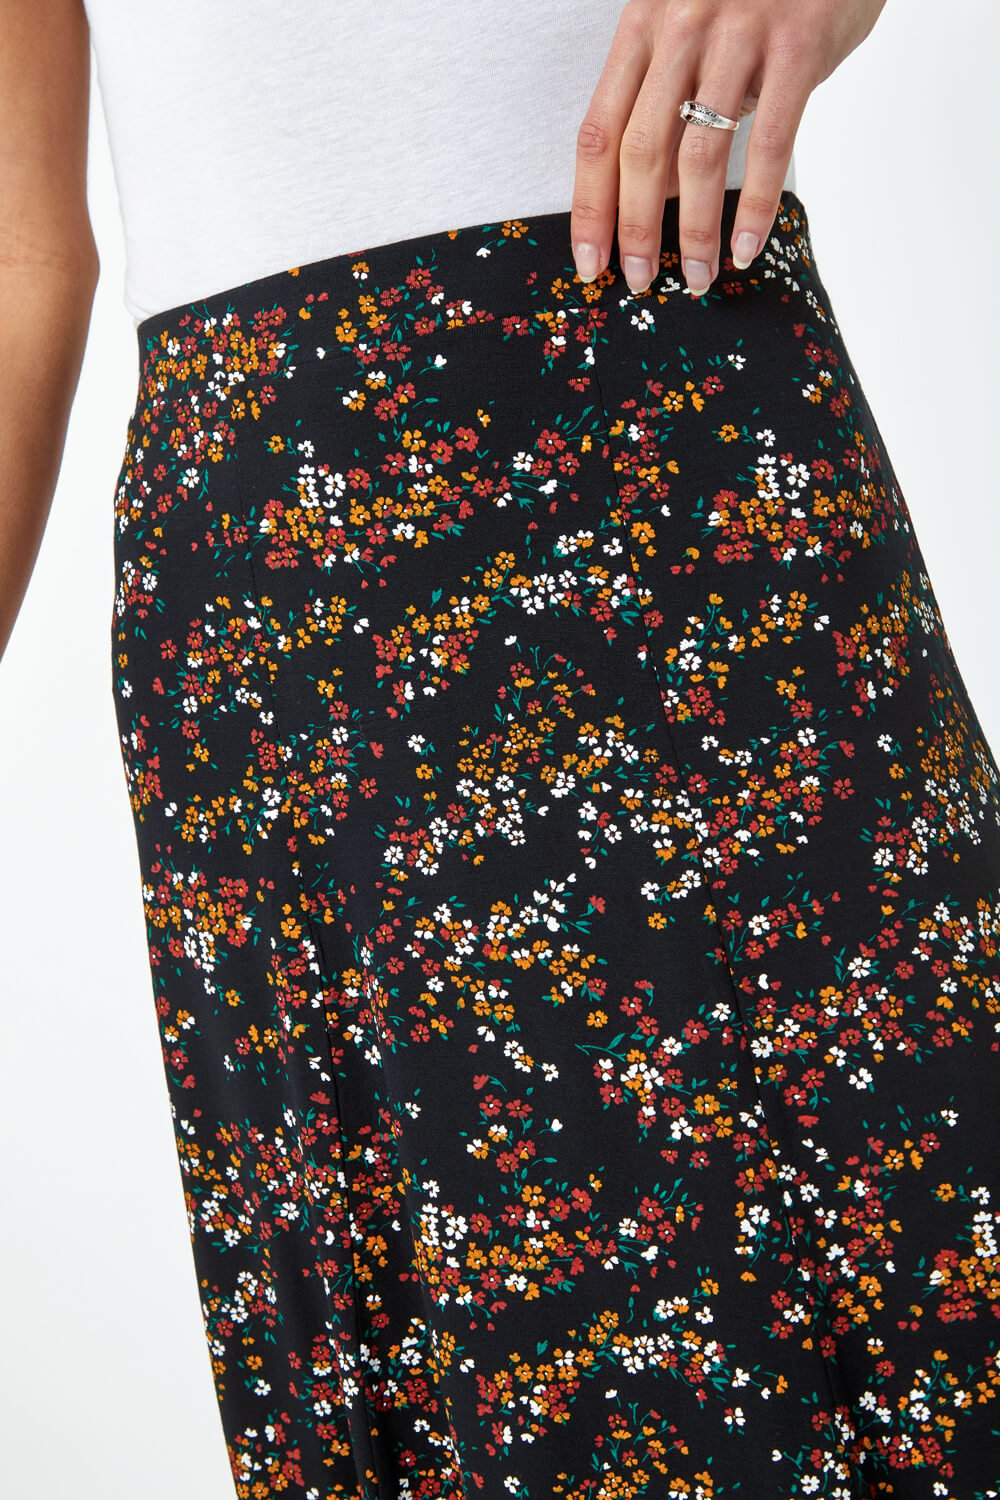 Black Ditsy Floral Jersey Skirt, Image 5 of 5